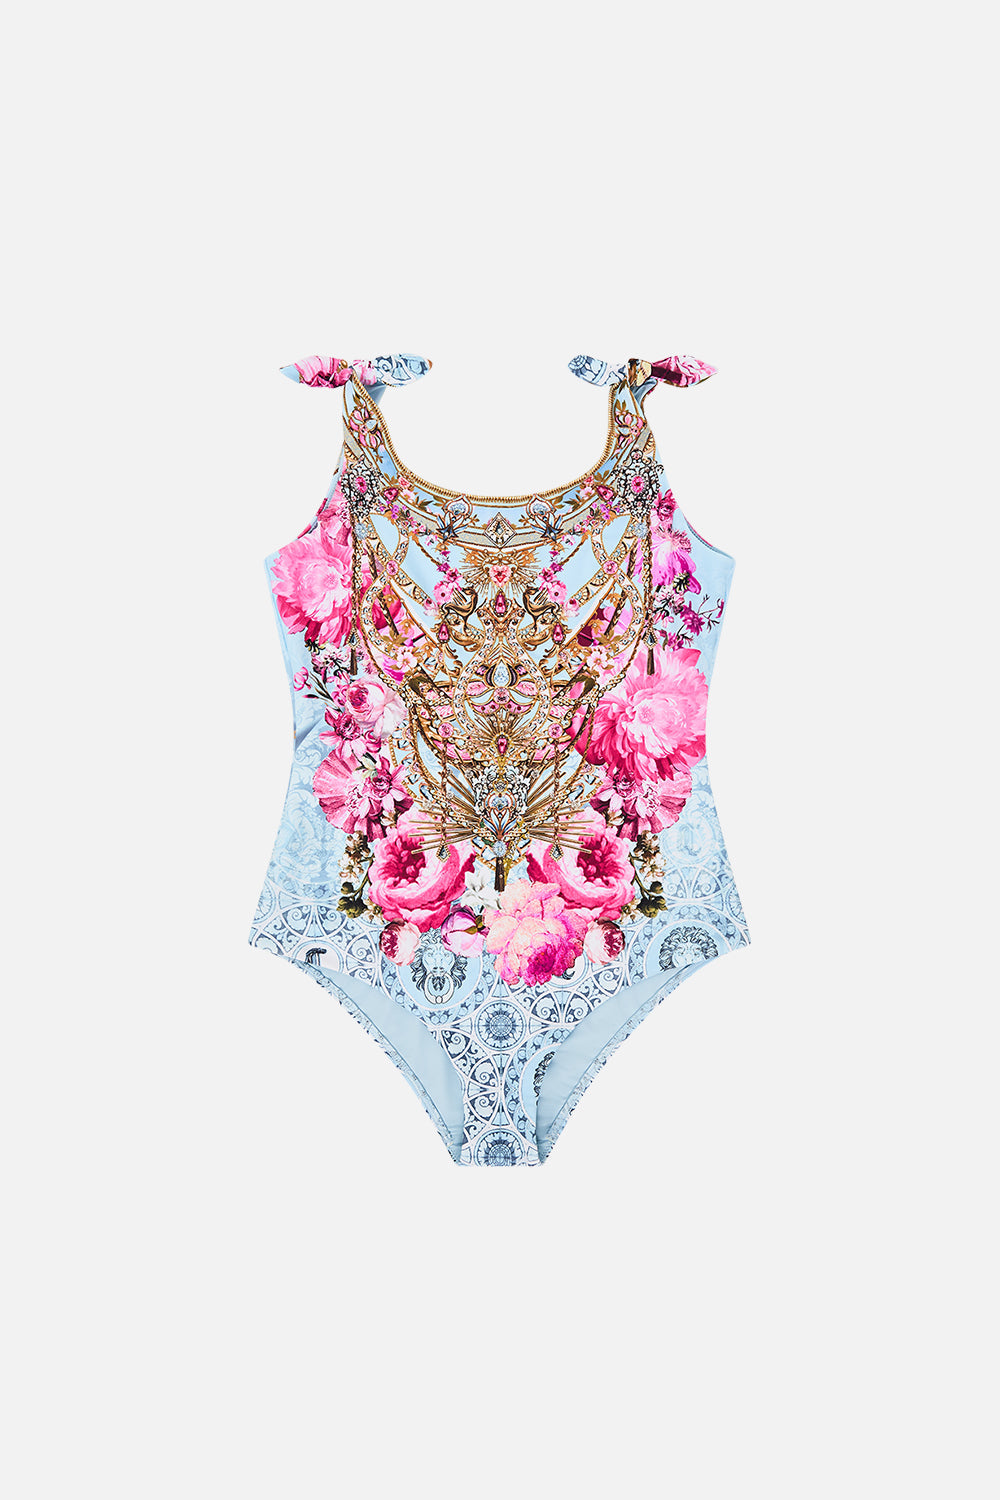 Milla by CAMILLA kids one piece swimsuit in Down The Garden Path print